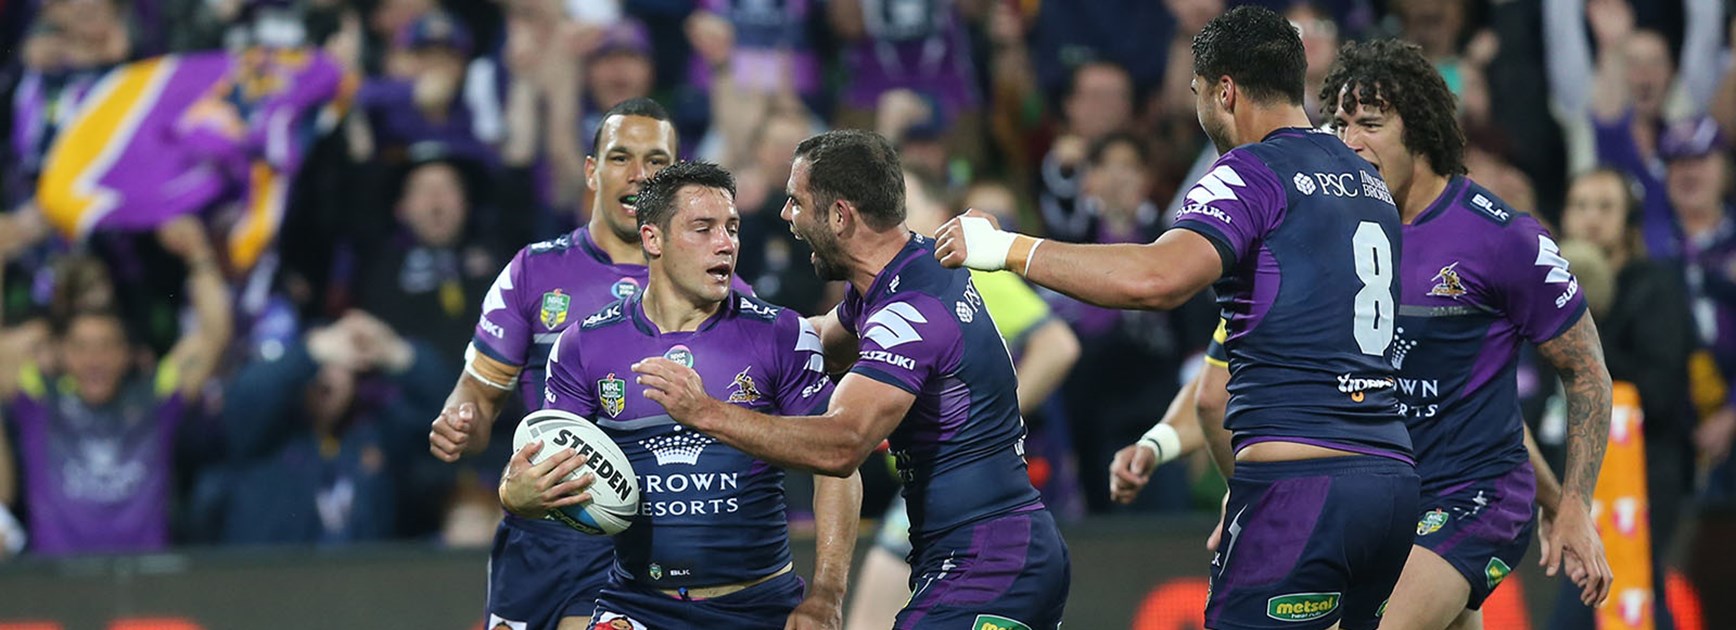 Cooper Cronk and teammates celebrate his try in the Preliminary Final against the Cowboys at AAMI Park.